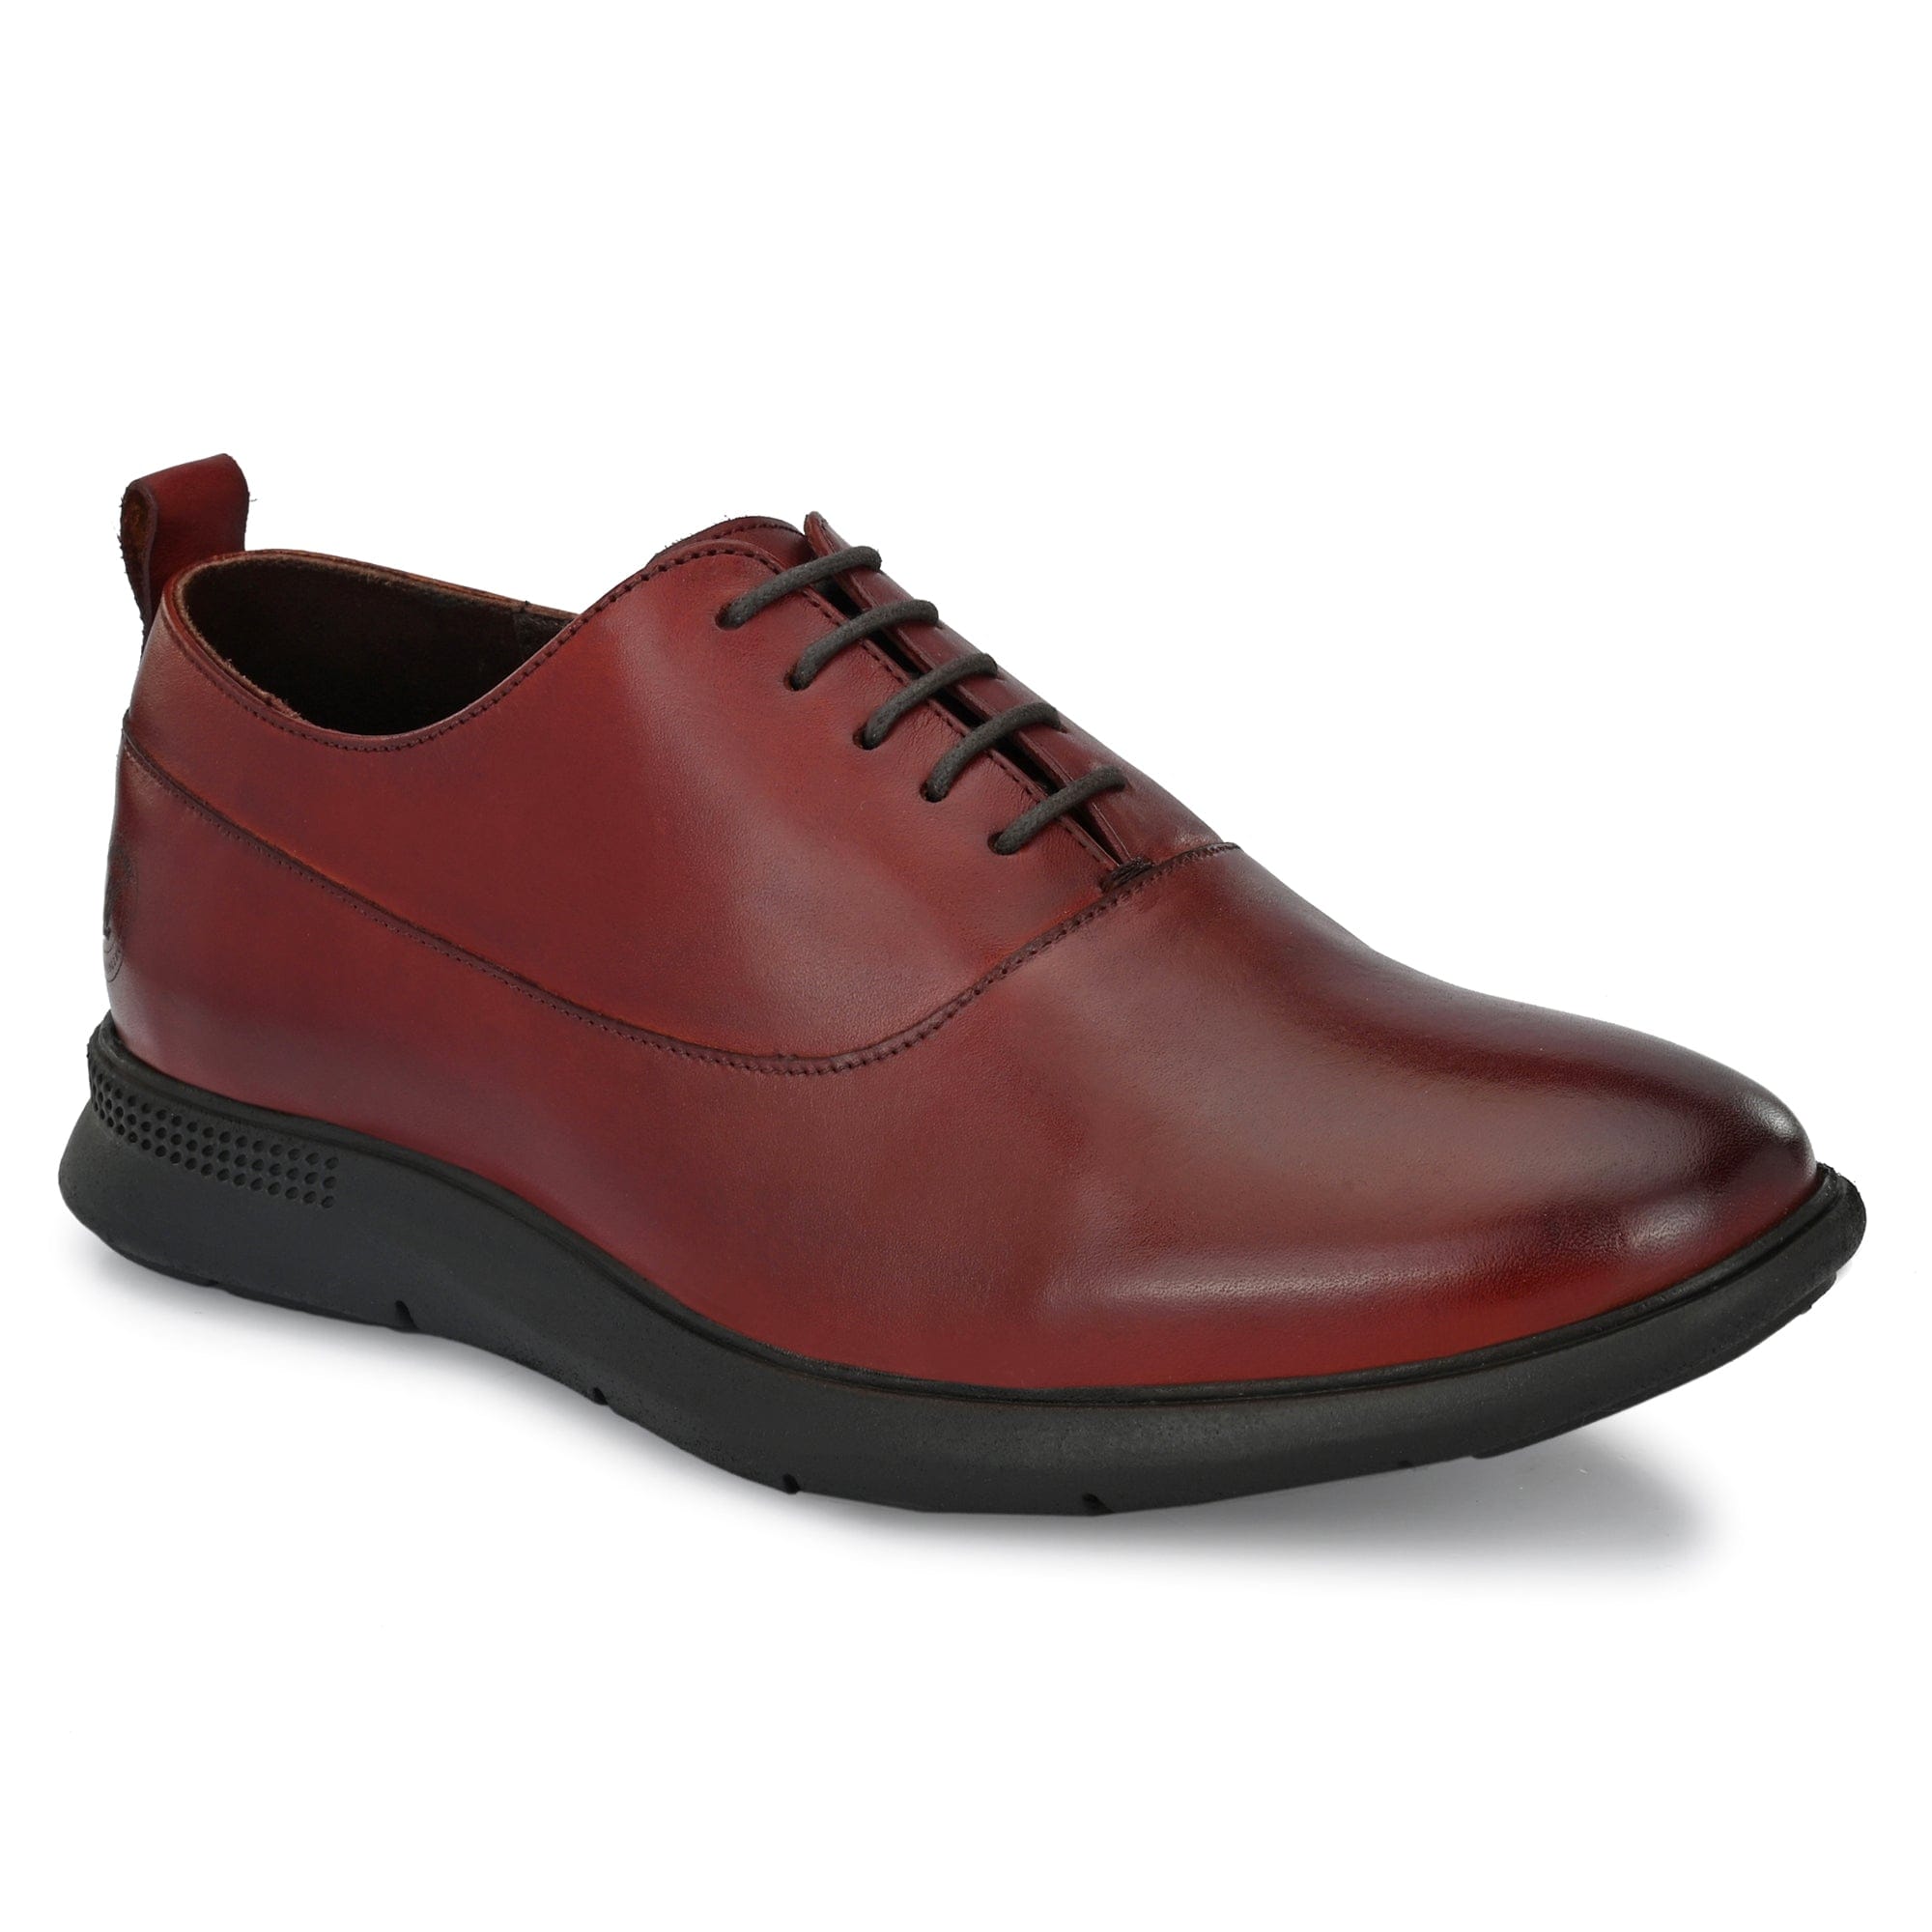 Legwork Crossover Cognac Red Italian Leather Shoes